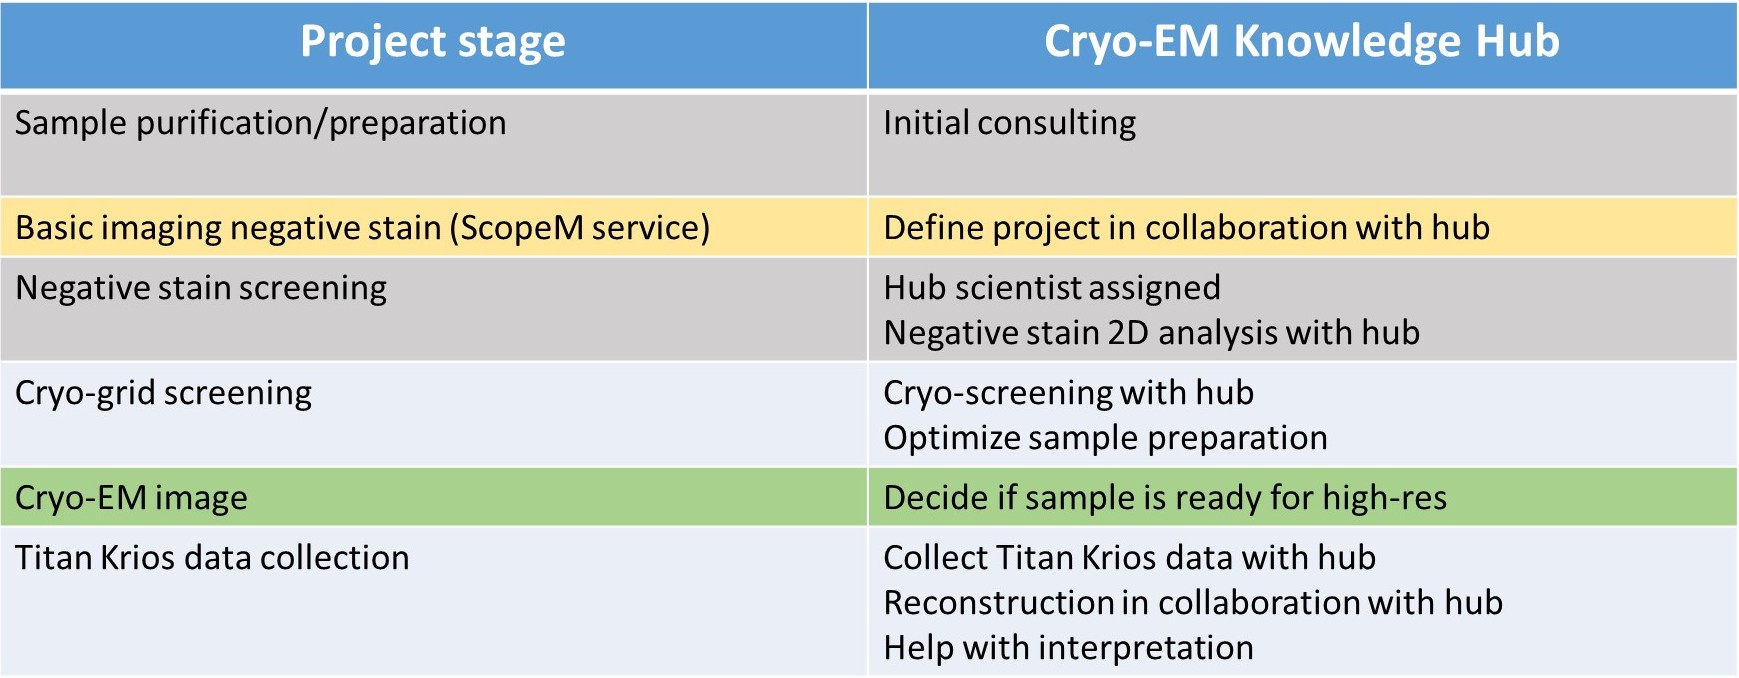 Cryo-EM Knowledge Hub can provide assistance for various project stages